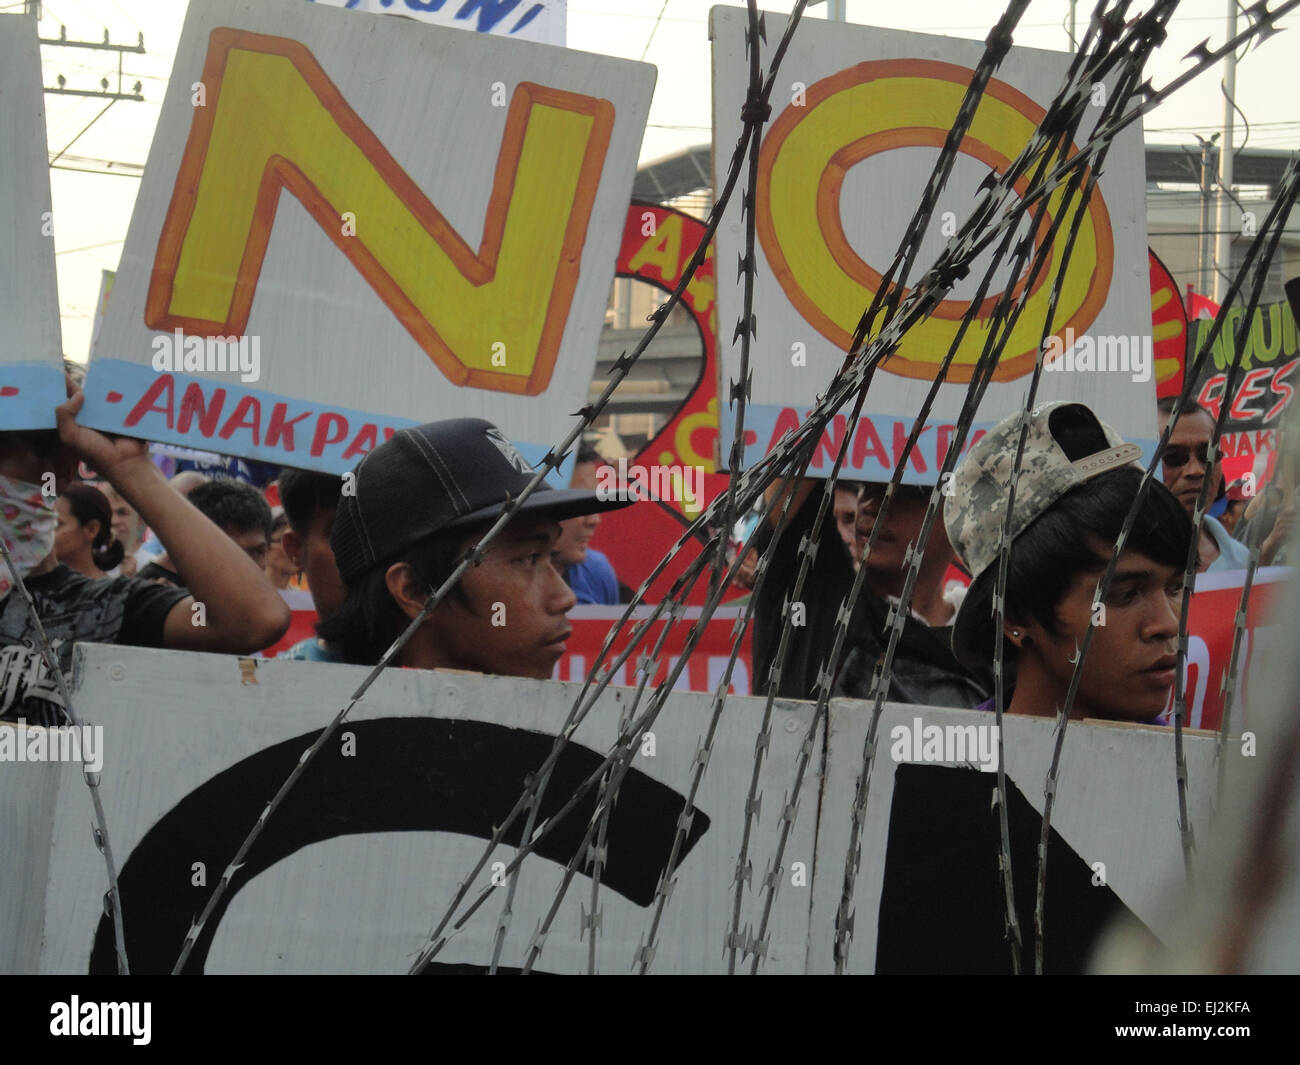 Manila, Philippines. 20th Mar, 2015. Filipino activists hold placards calling for the resignation of Philippine President Benigno Aquino III, during a rally at Mendiola. President Aquino is facing calls for his removal over the botched anti-terror operation last January 25 in Mamasapano, Maguindanao to hunt wanted Malaysian bombmaker Zulkifri bin Hir, alias Marwan, that resulted in the deaths of 44 police commandos. Credit:  Richard James Mendoza/Pacific Press/Alamy Live News Stock Photo